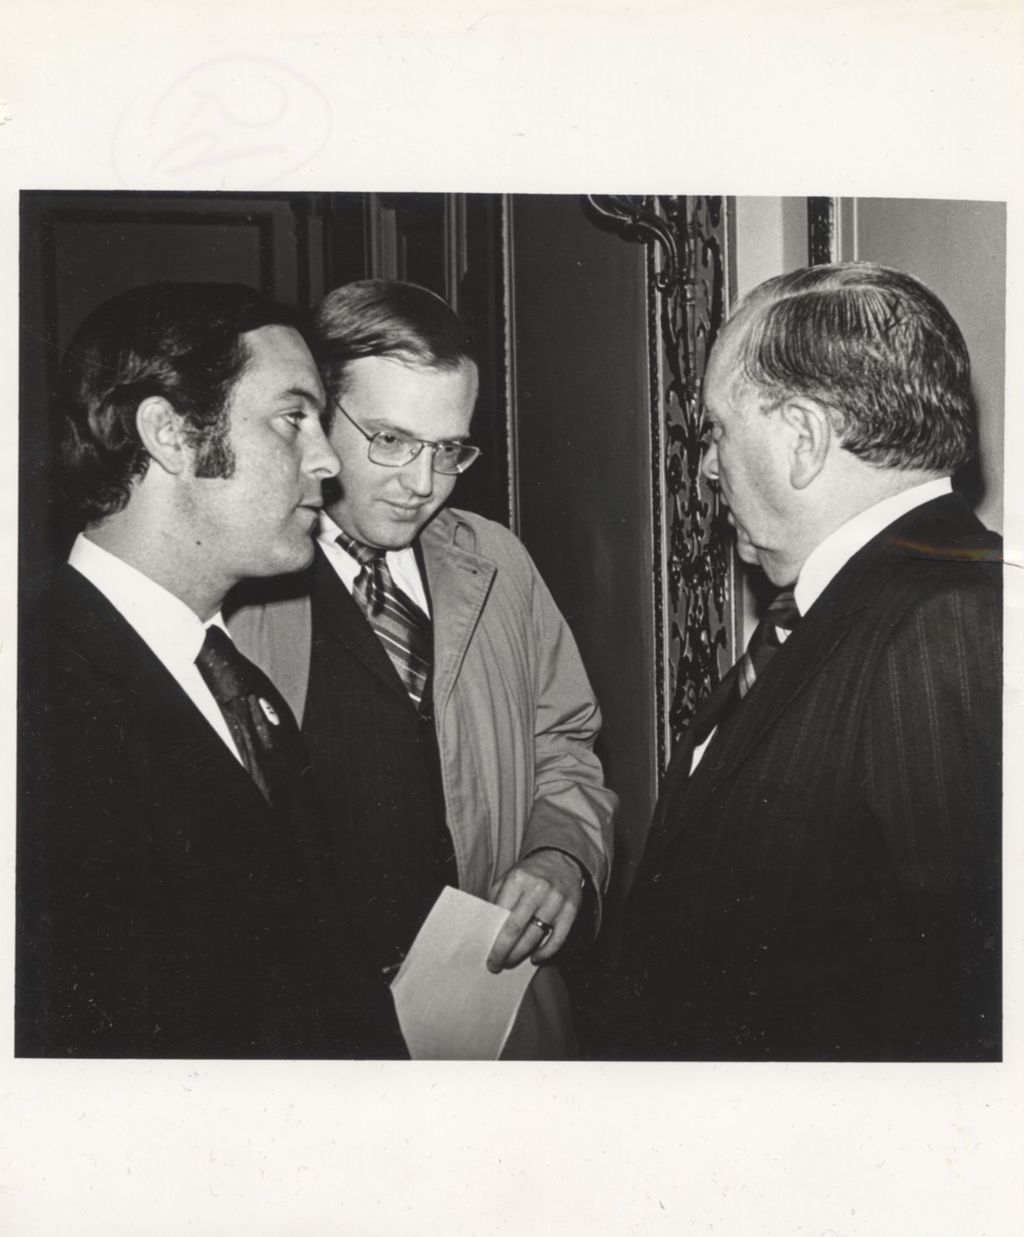 Miniature of Richard J. Daley speaking with two men at a "We Care" event